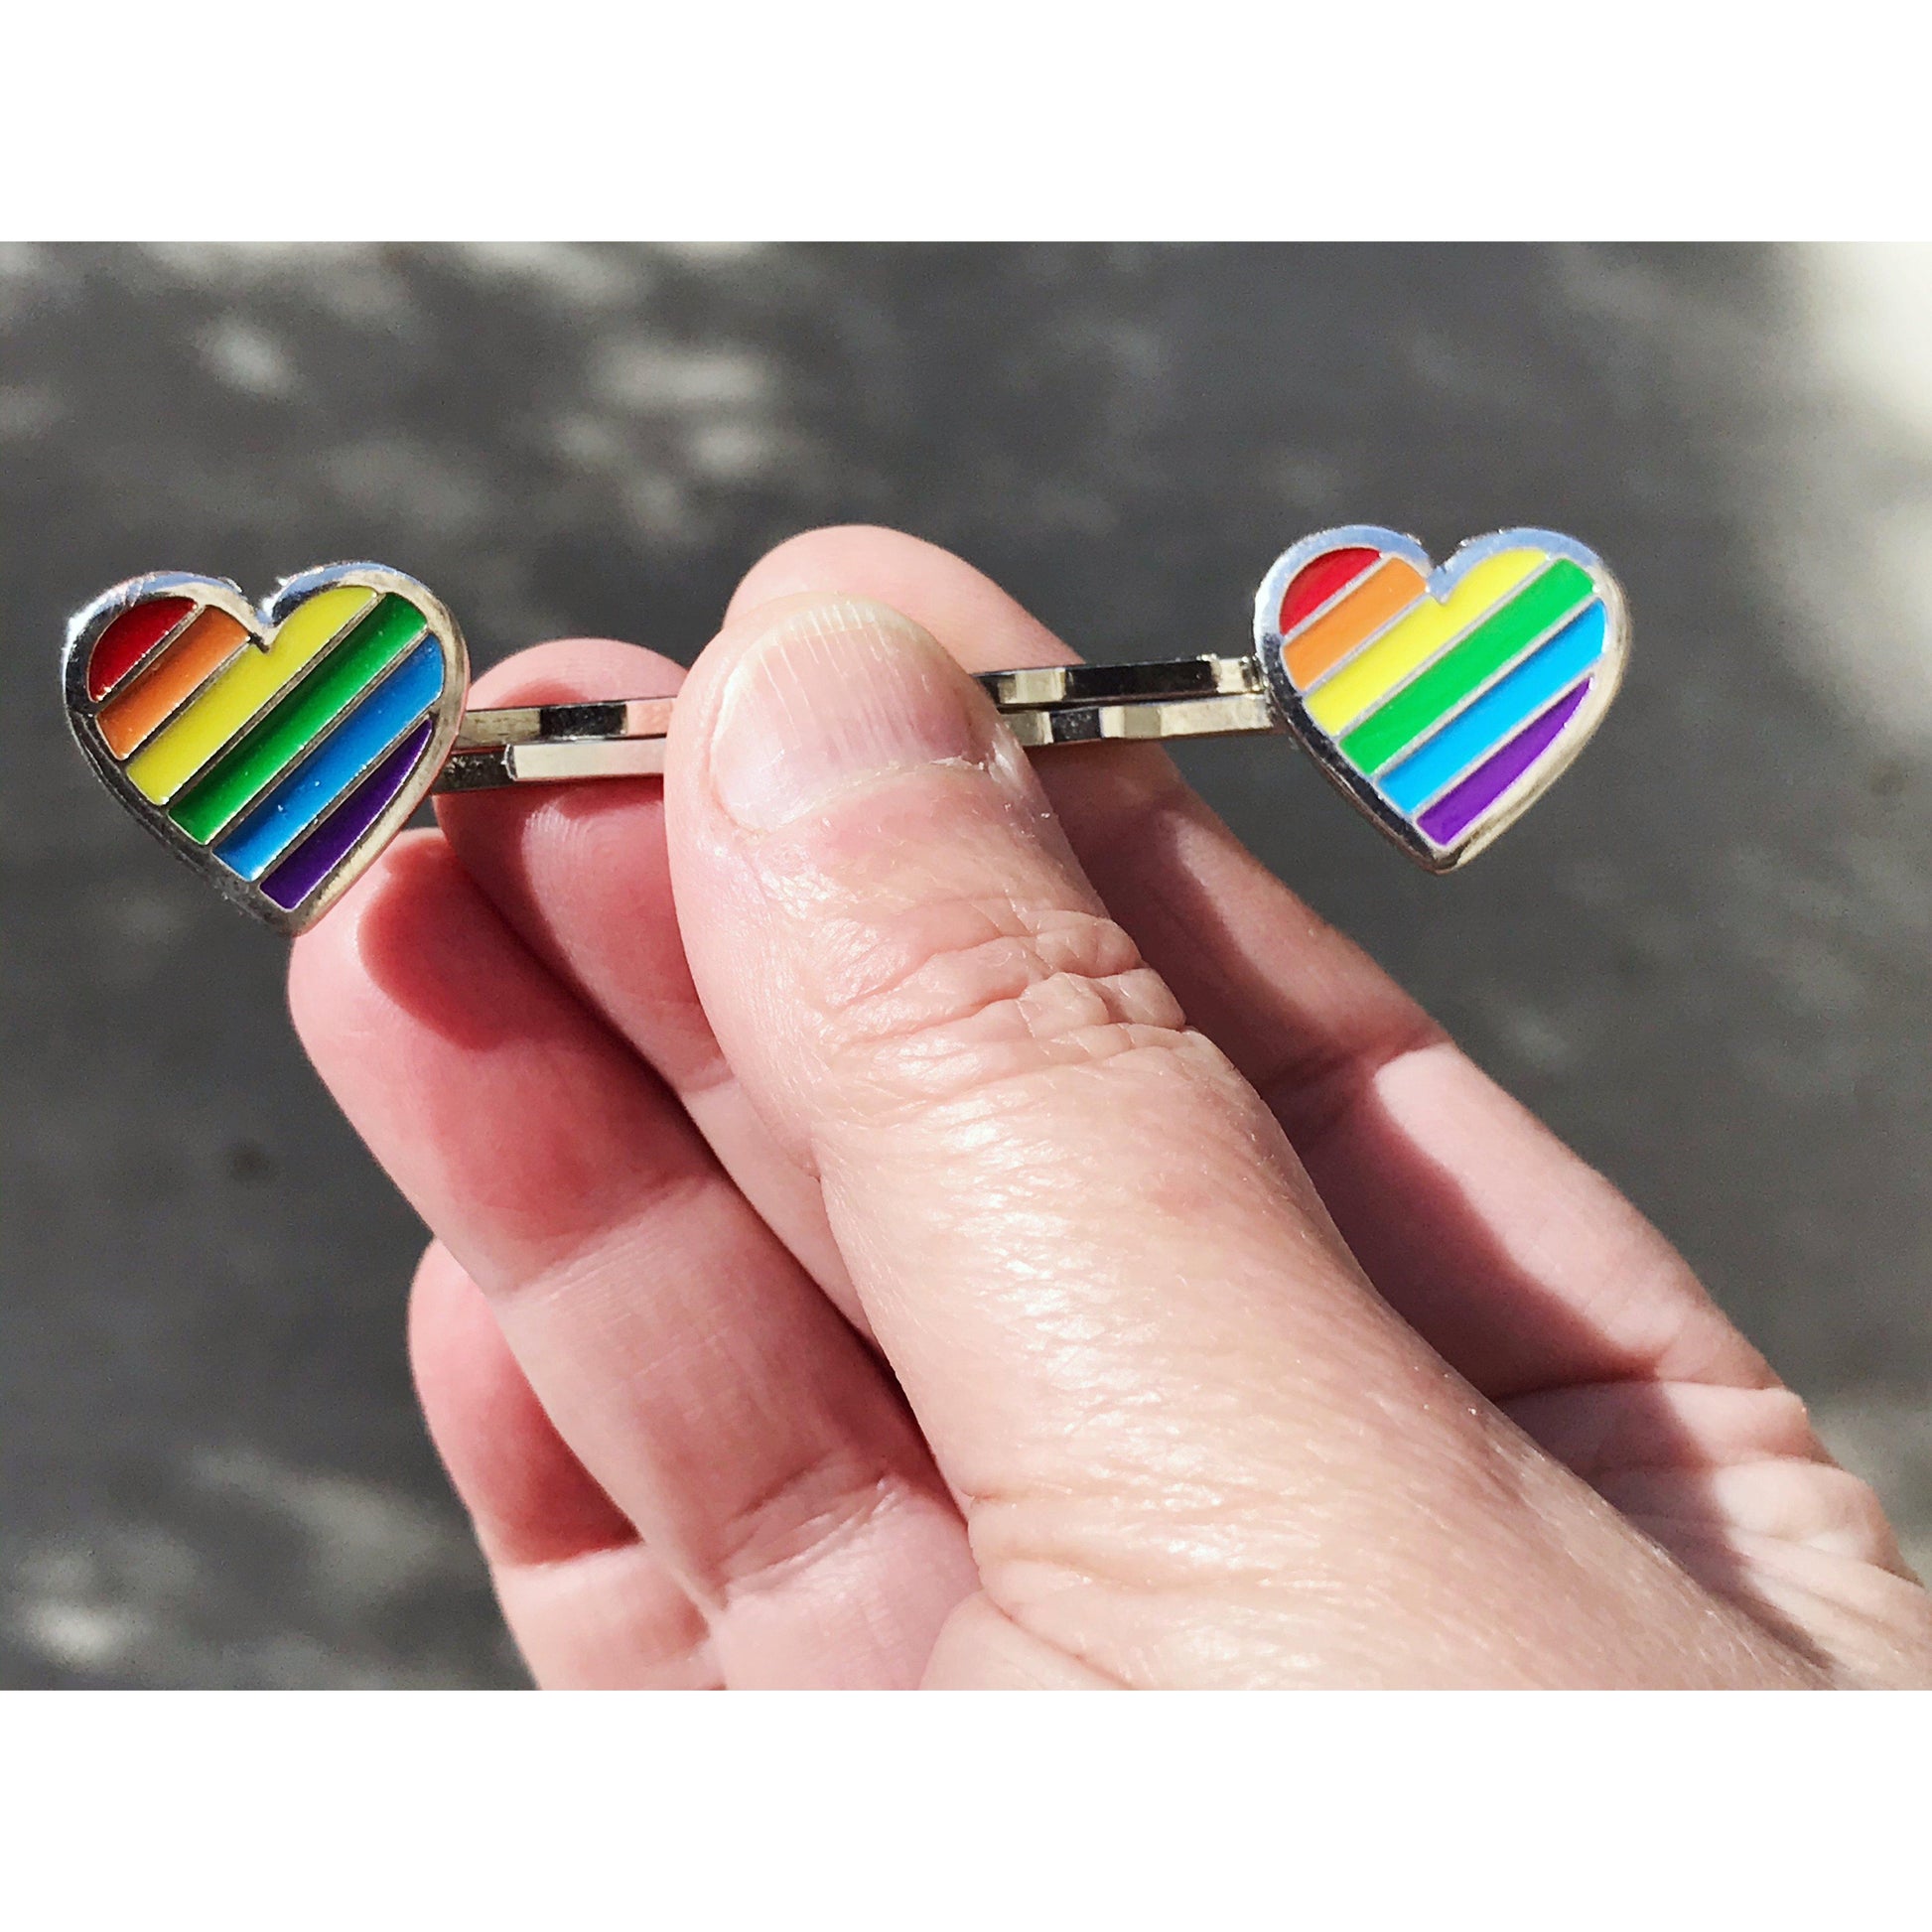 Rainbow Heart Hair Pins - Colorful and Playful Accessories